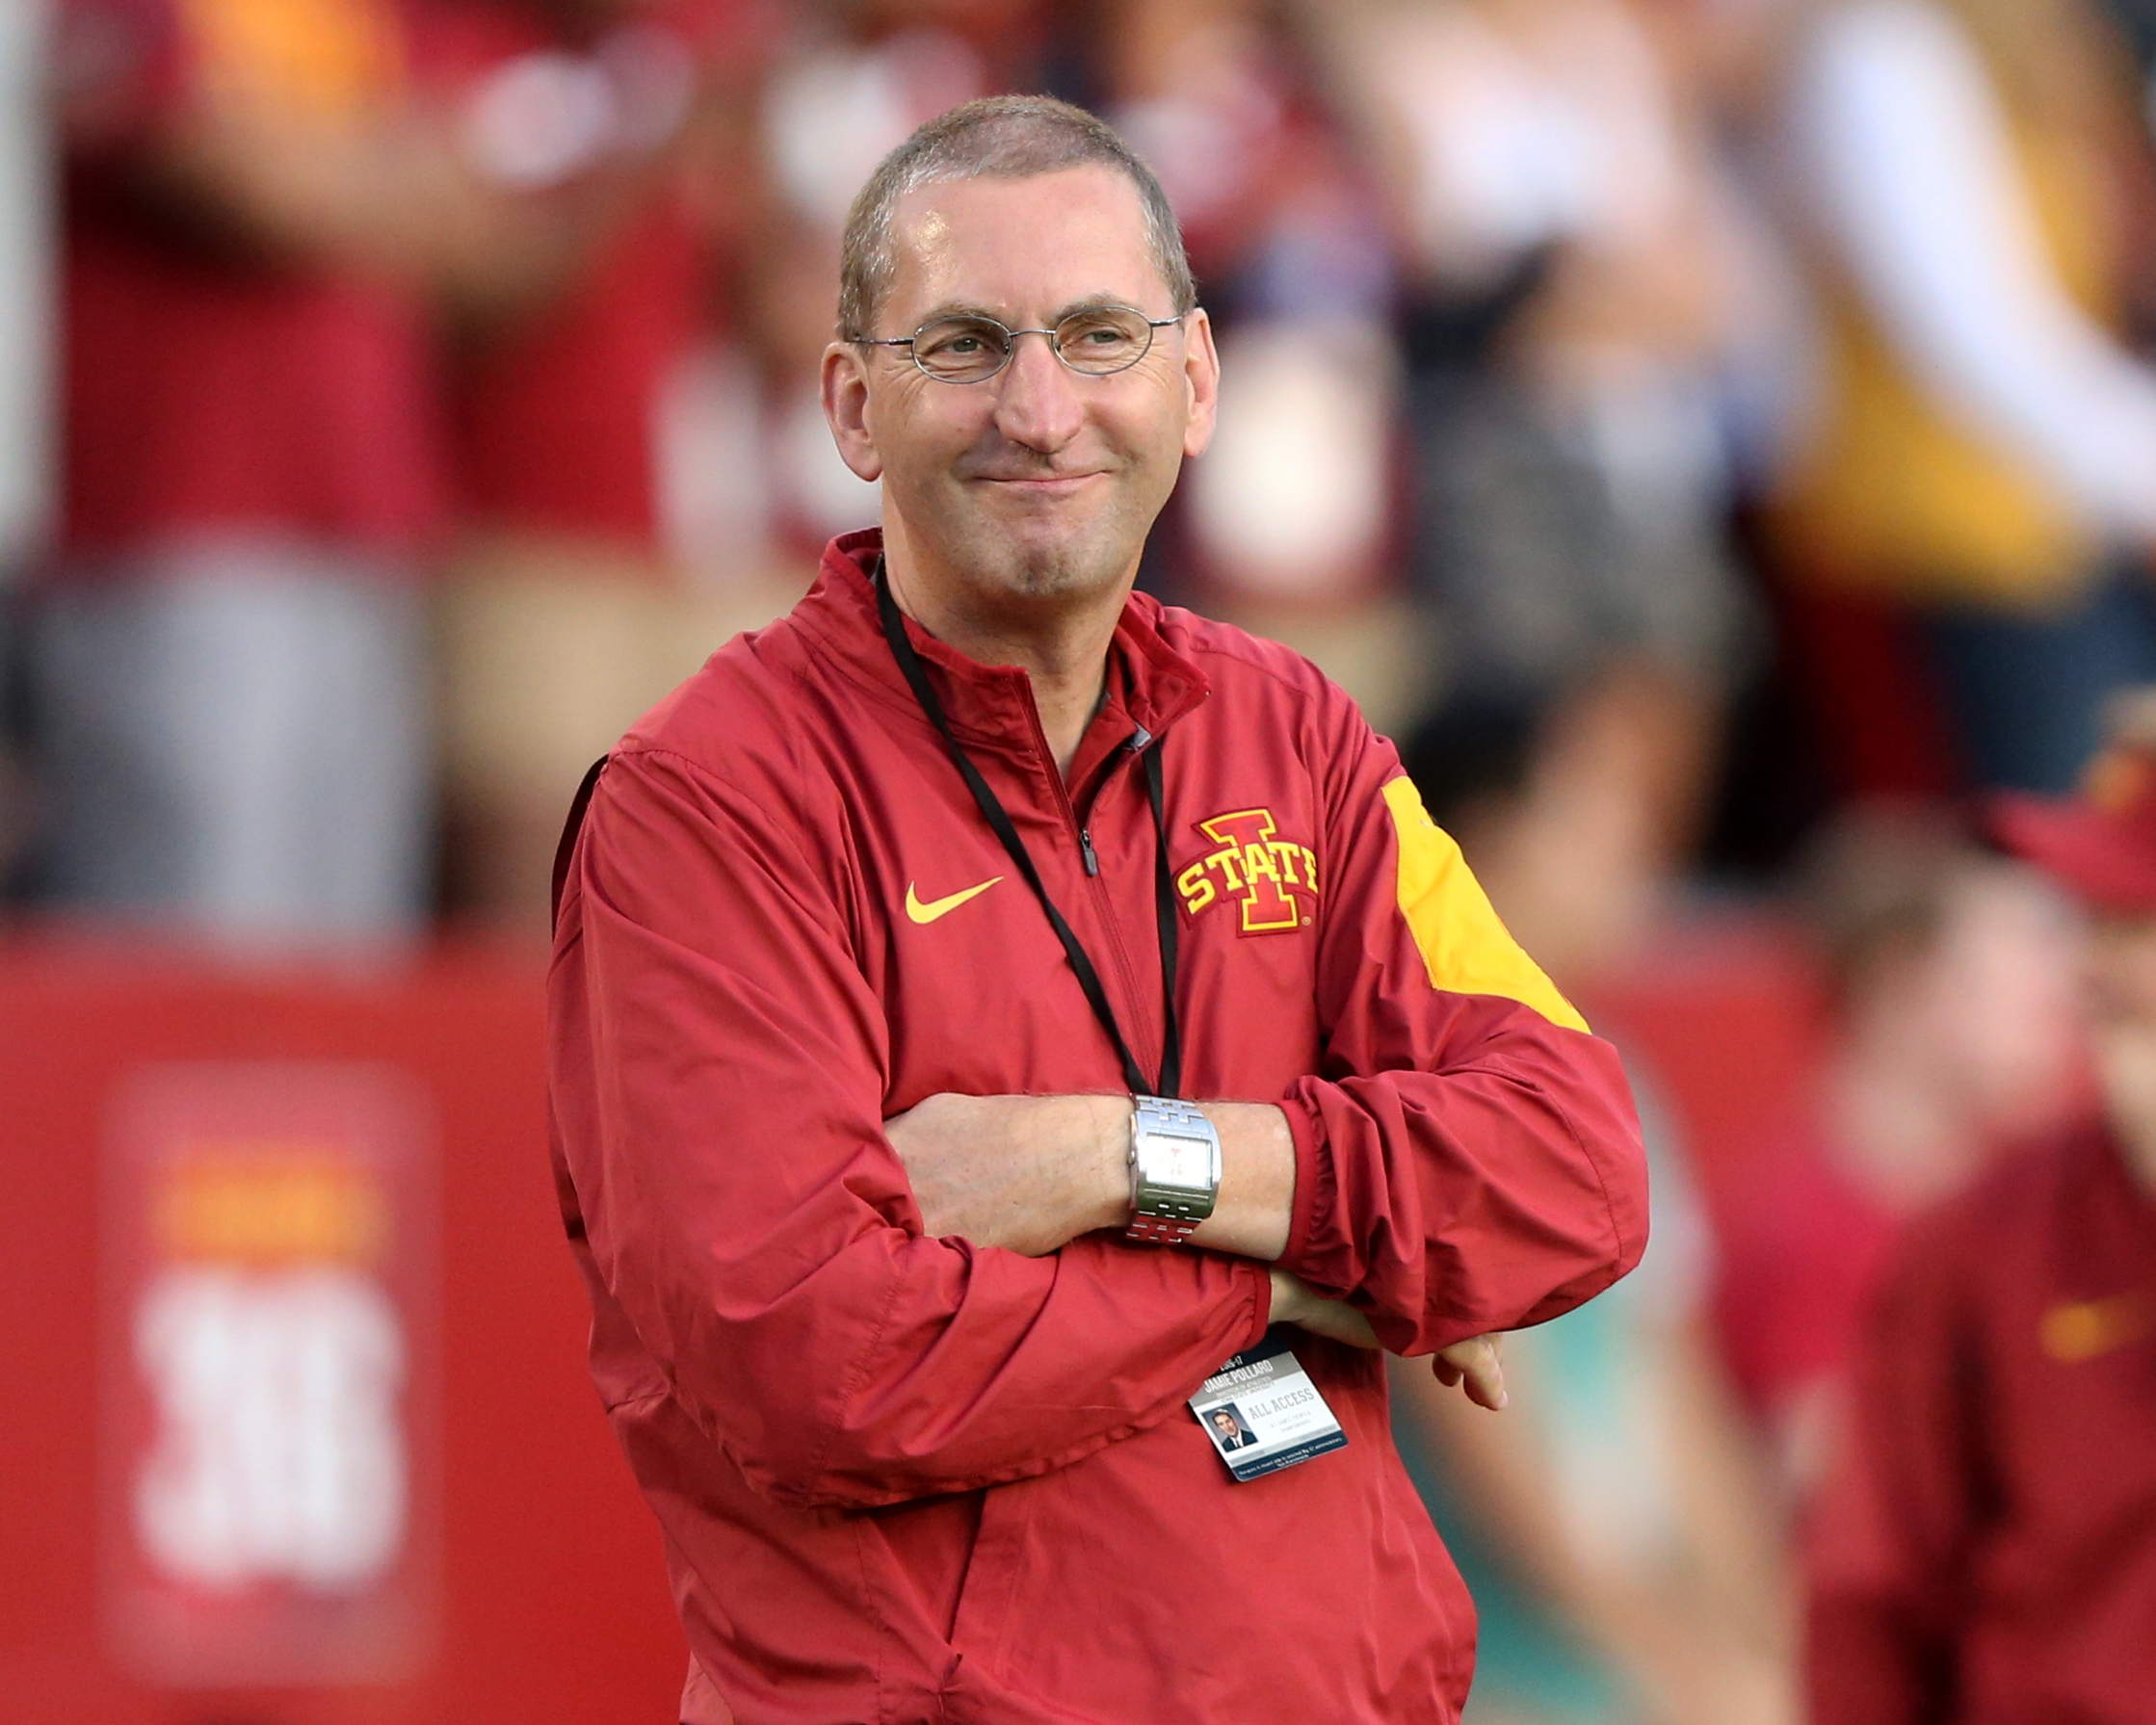 Sep 3, 2016; Ames, IA, USA; Iowa State athletic director Jamie Pollard watches the Cyclones pregame warmups for their game against the Northern Iowa Panthers at Jack Trice Stadium. Mandatory Credit: Reese Strickland-USA TODAY Sports